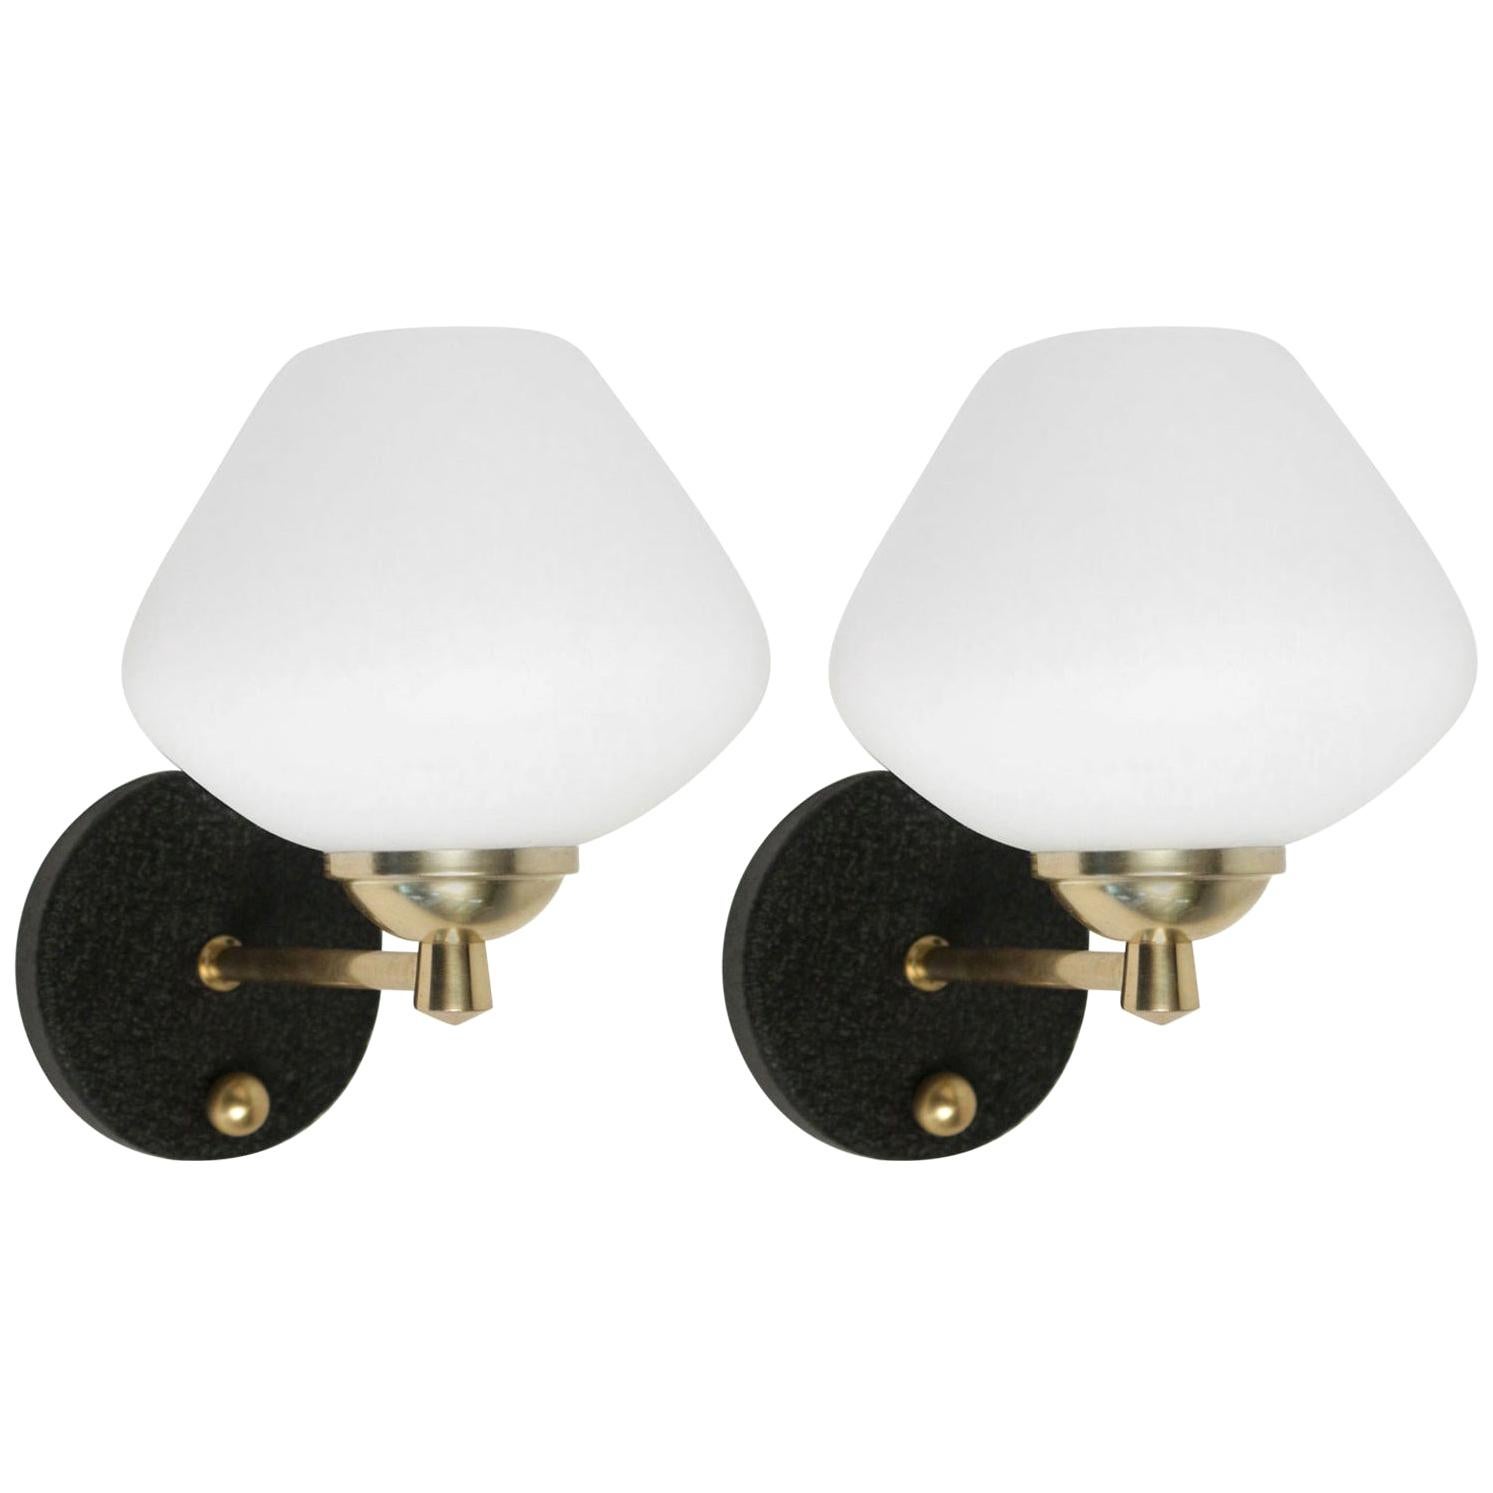 1950s Maison Arlus Pair of Sconce